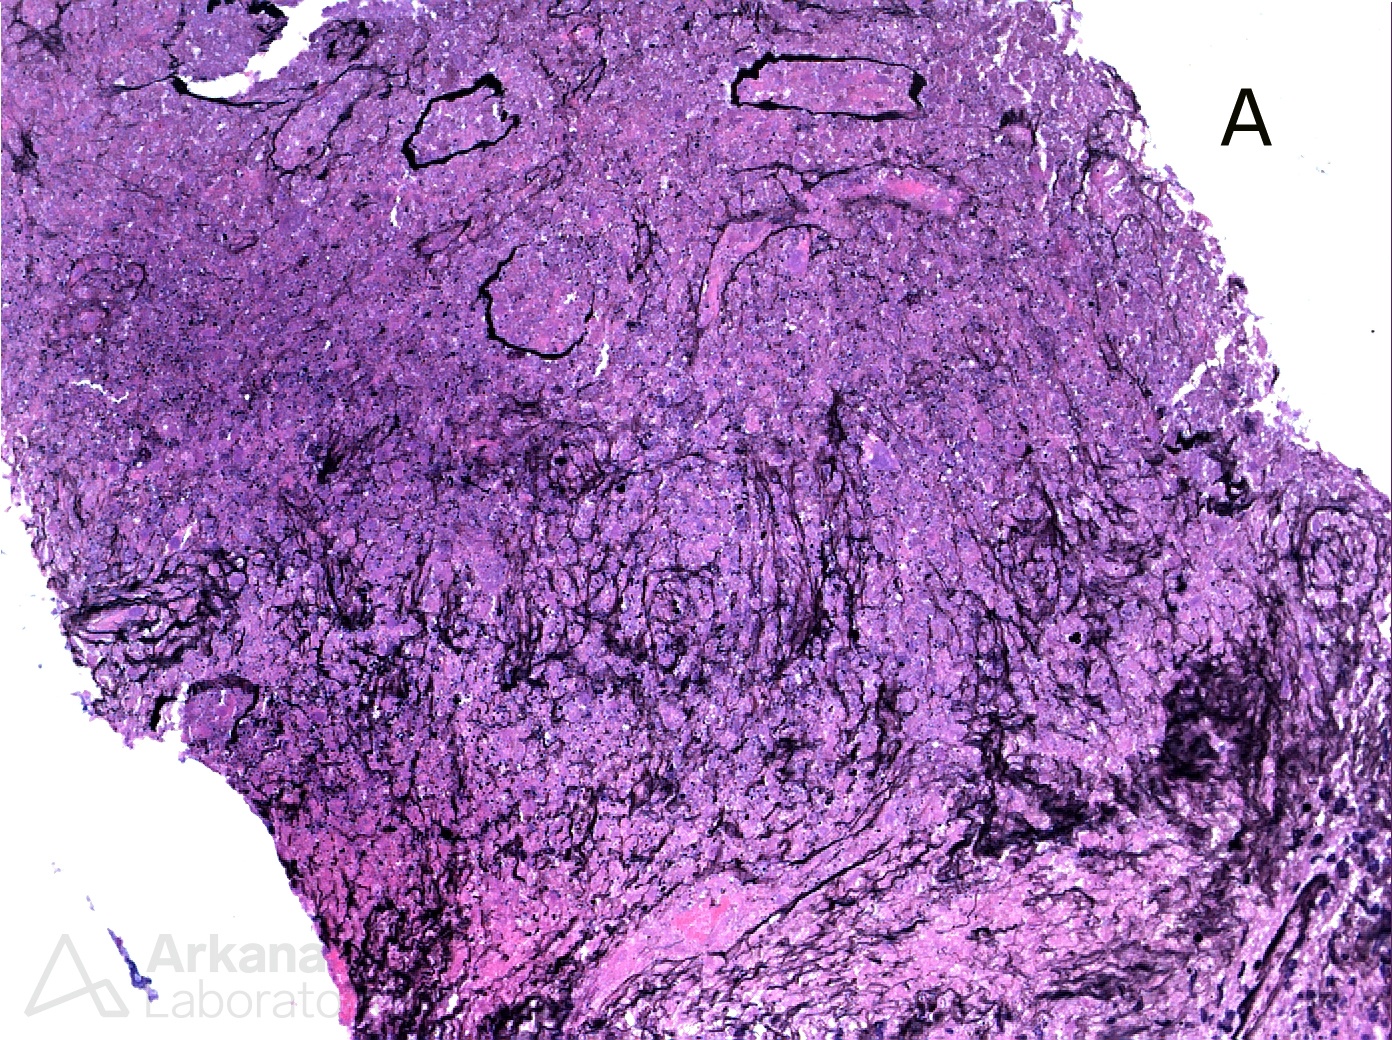 Tuberculosis, caseating necrosis in the renal parenchyma